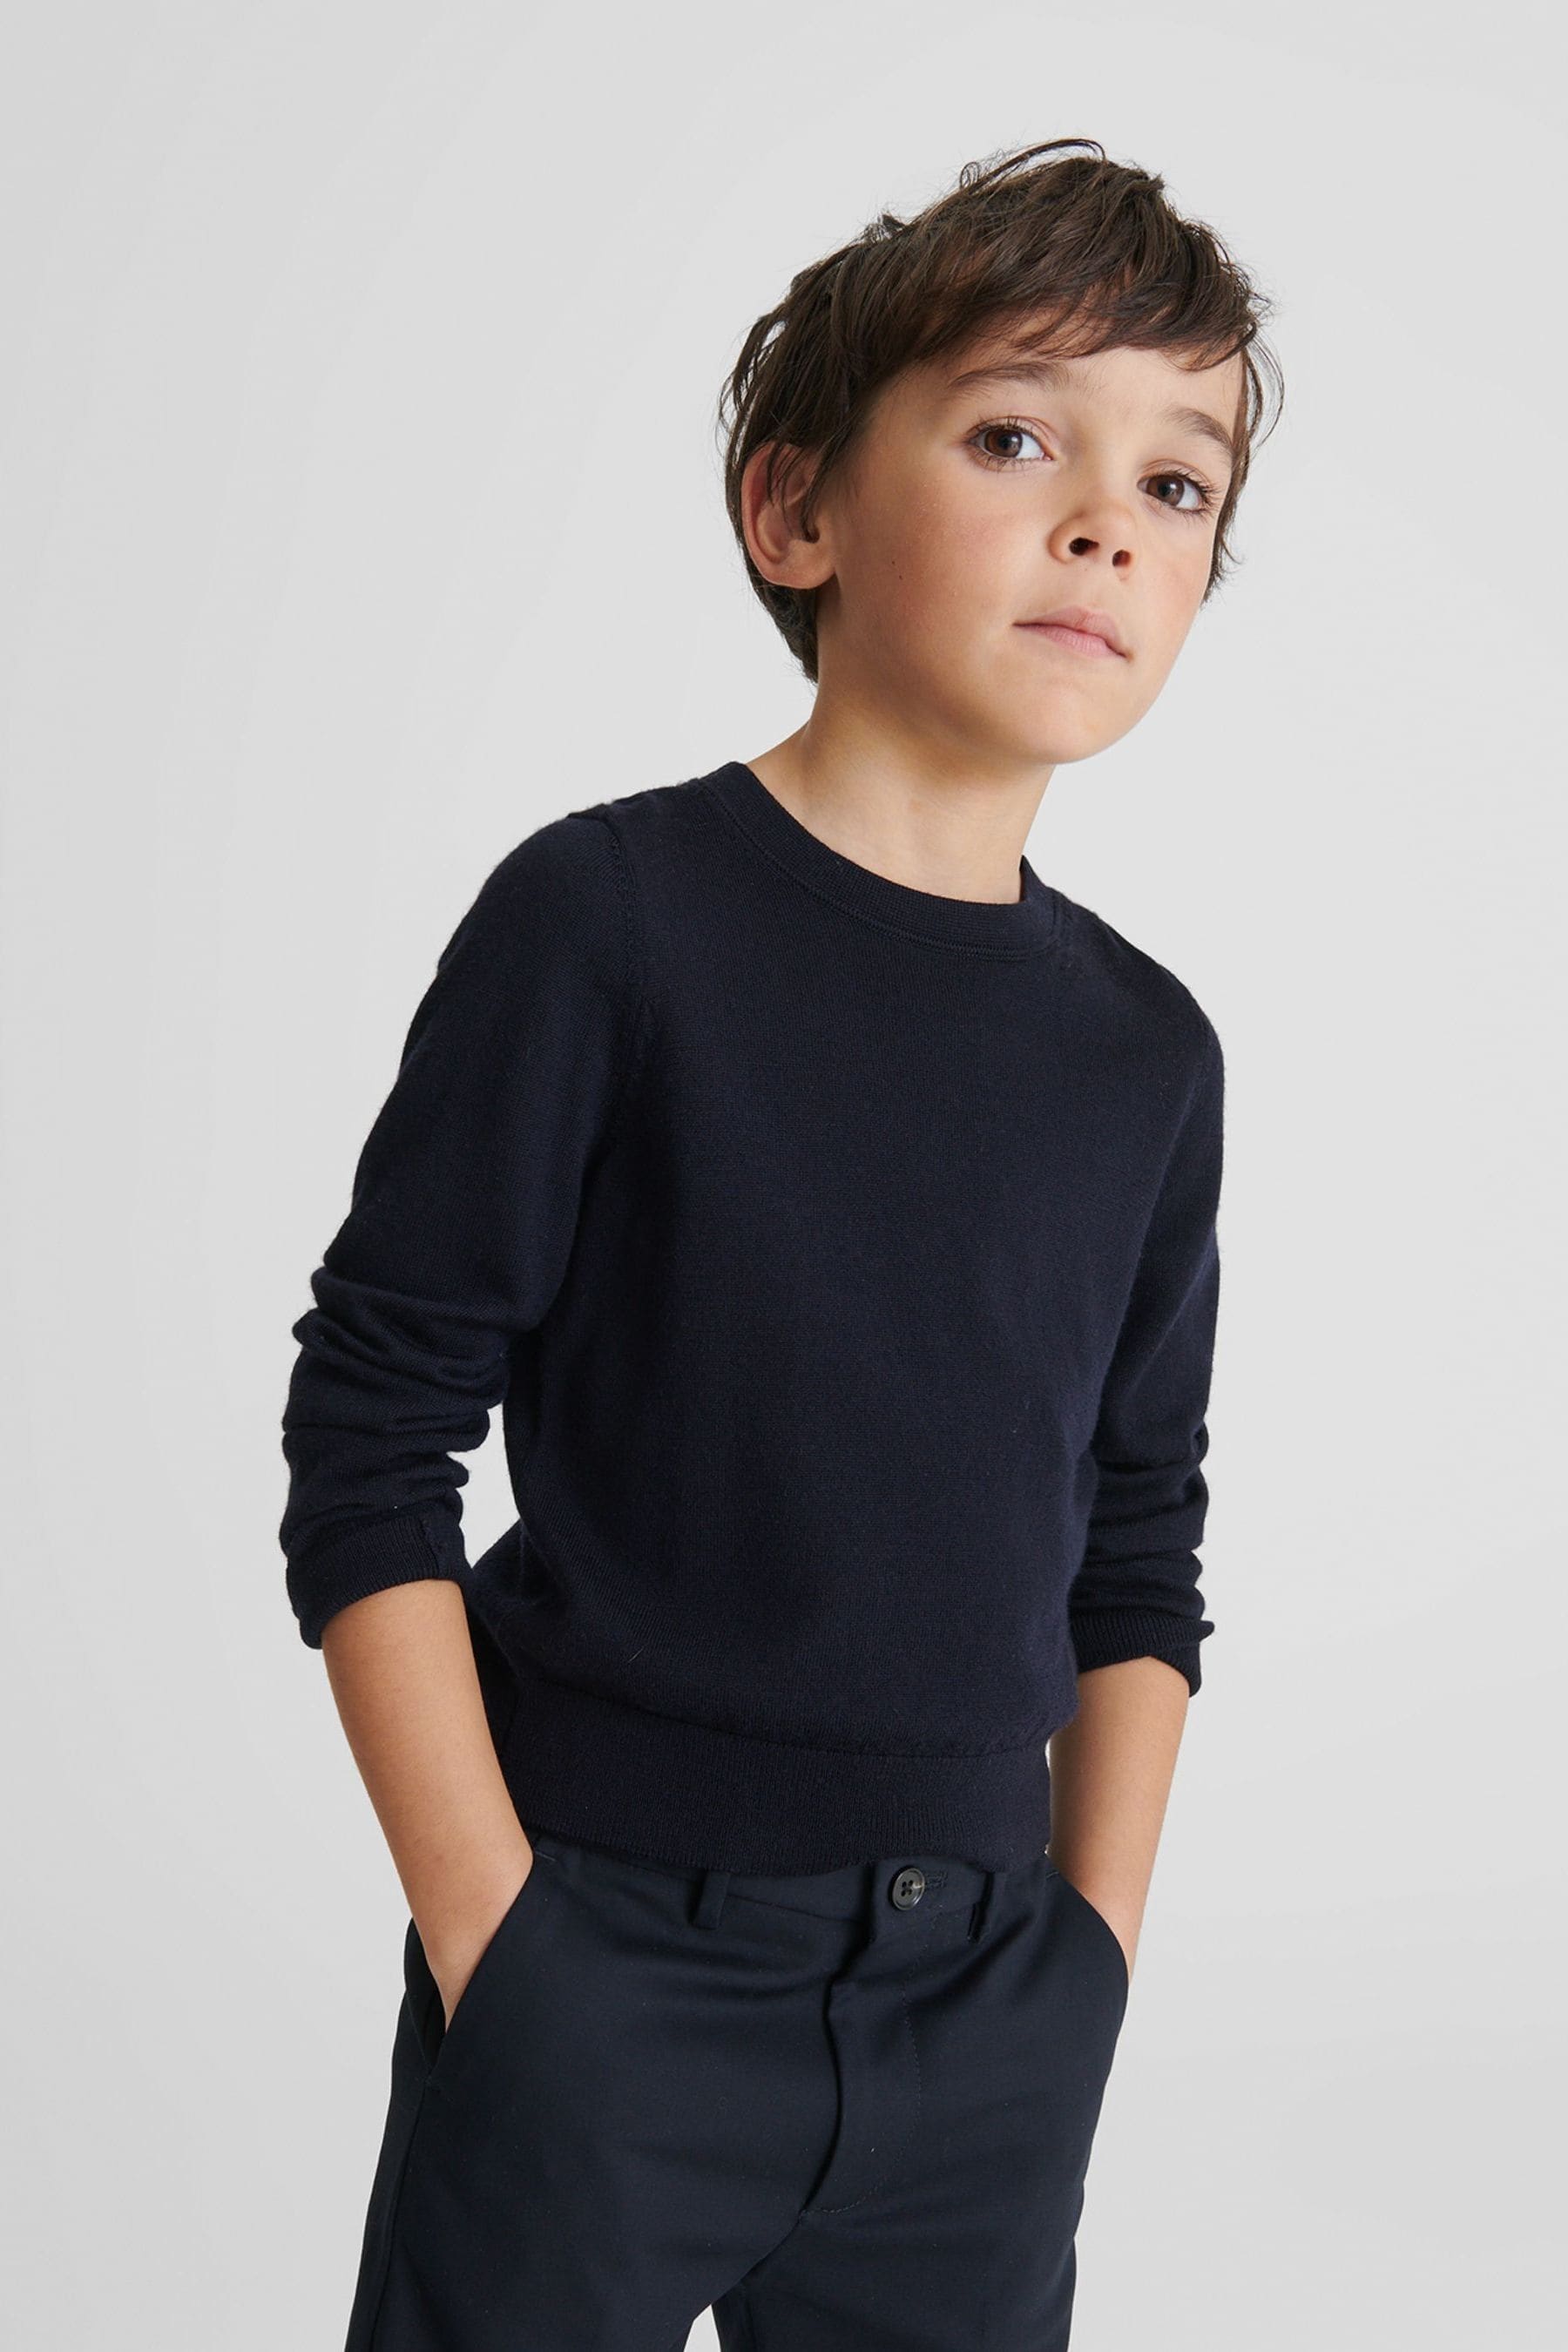 Reiss Wessex - Blue Wessex Crew Neck Knitted Jumper, Uk 7-8 Yrs In Navy